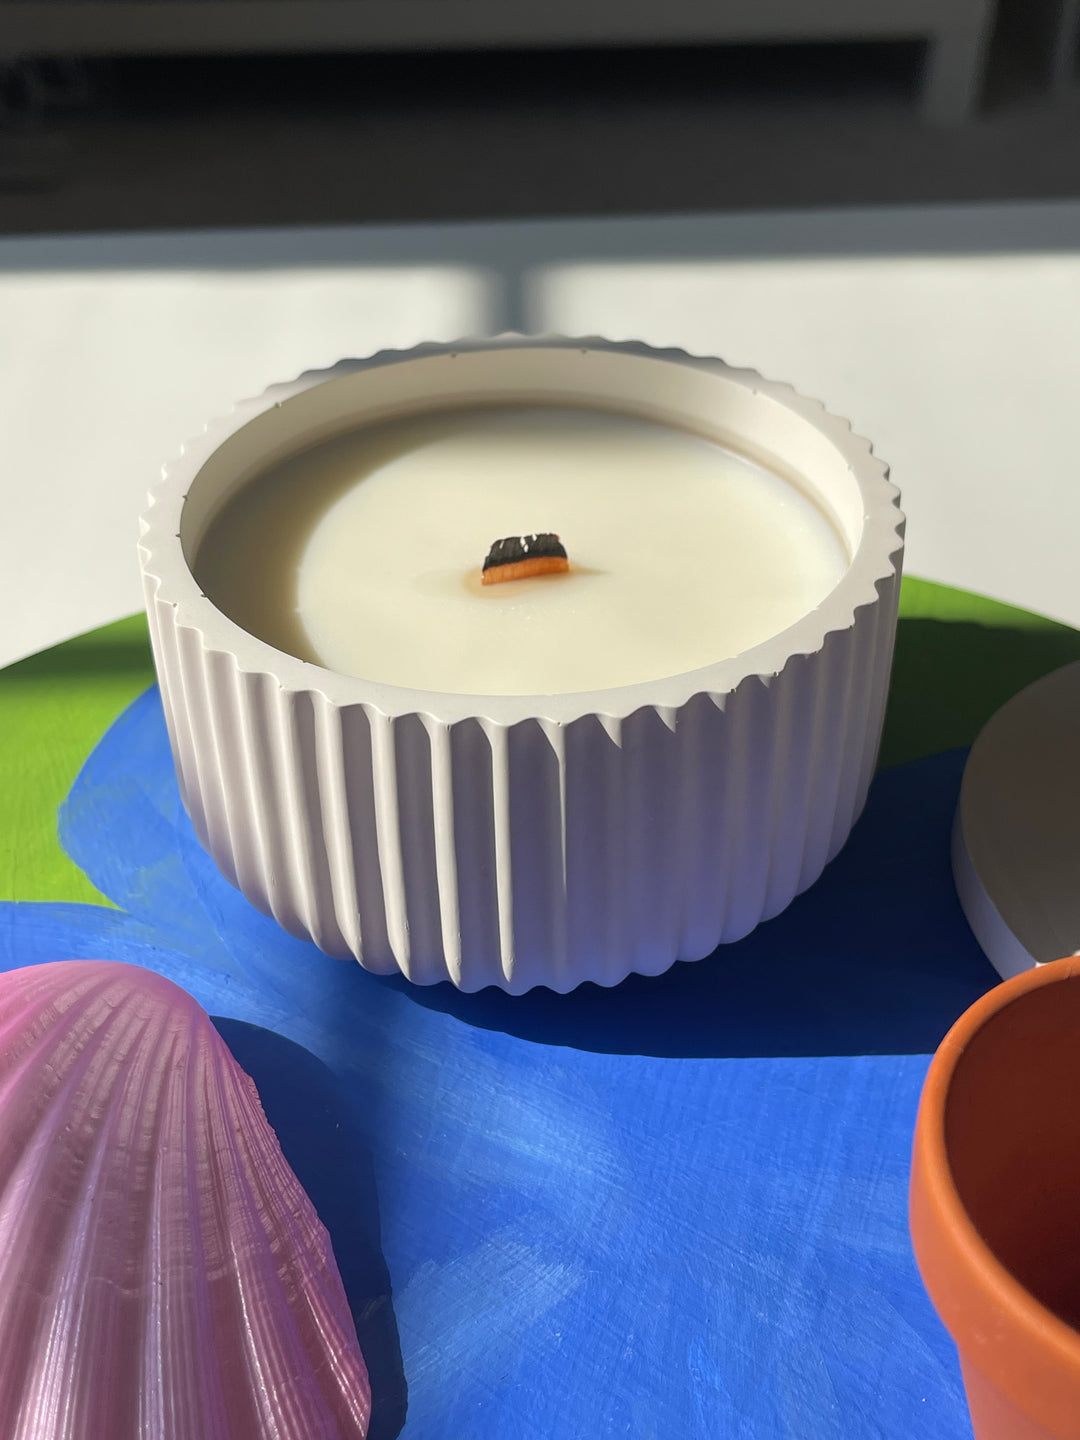 The Ribbed Candle